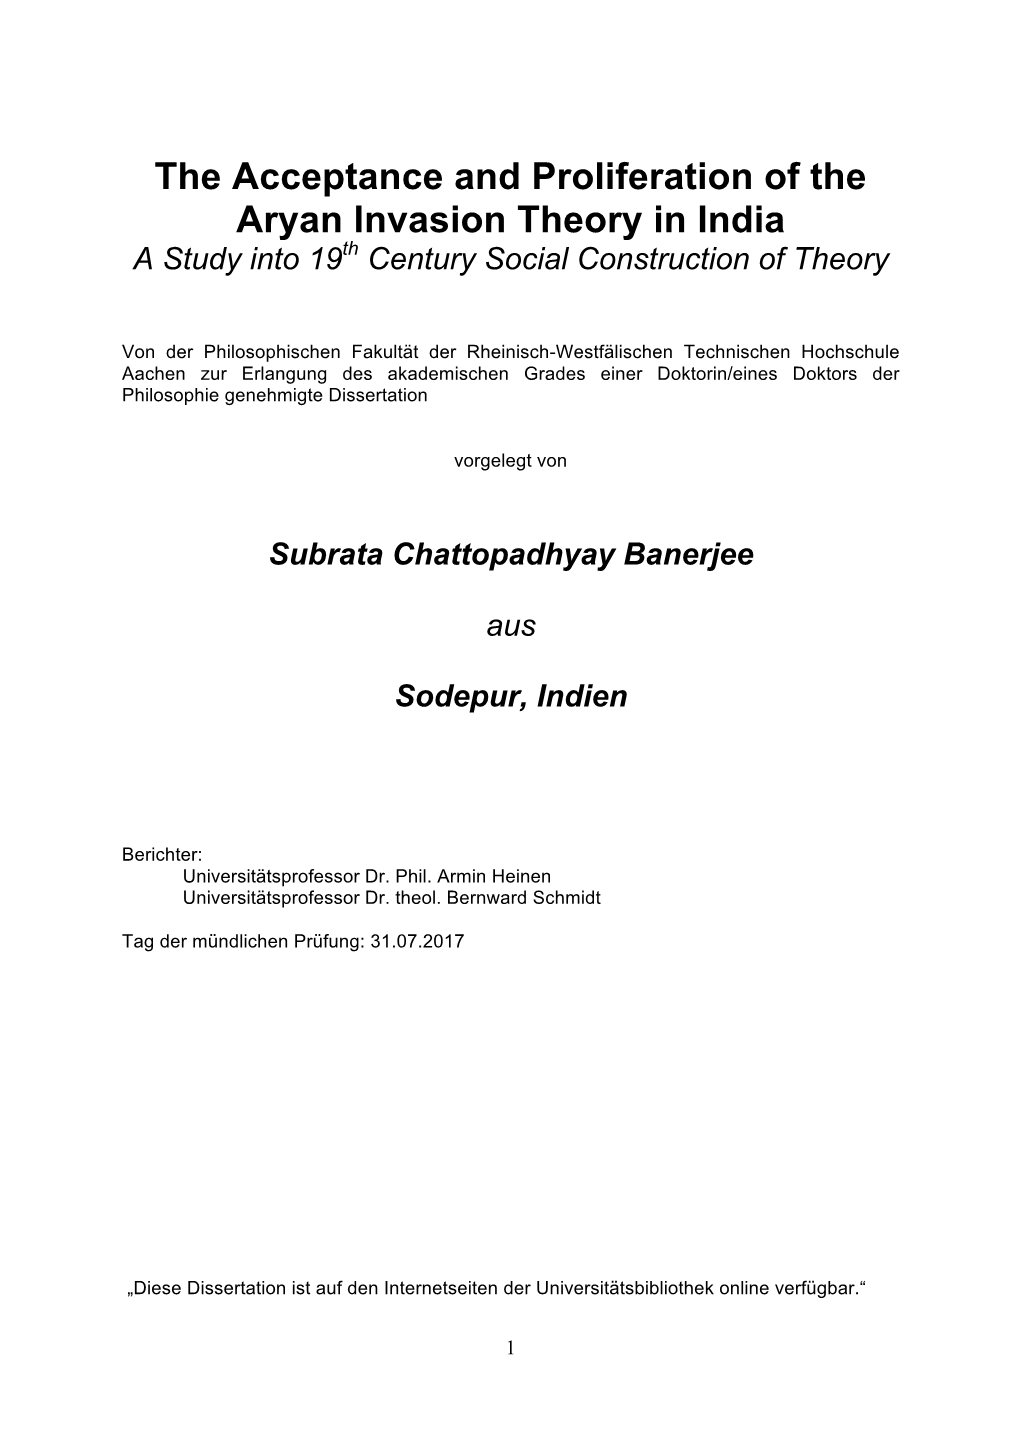 The Acceptance and Proliferation of the Aryan Invasion Theory in India a Study Into 19Th Century Social Construction of Theory